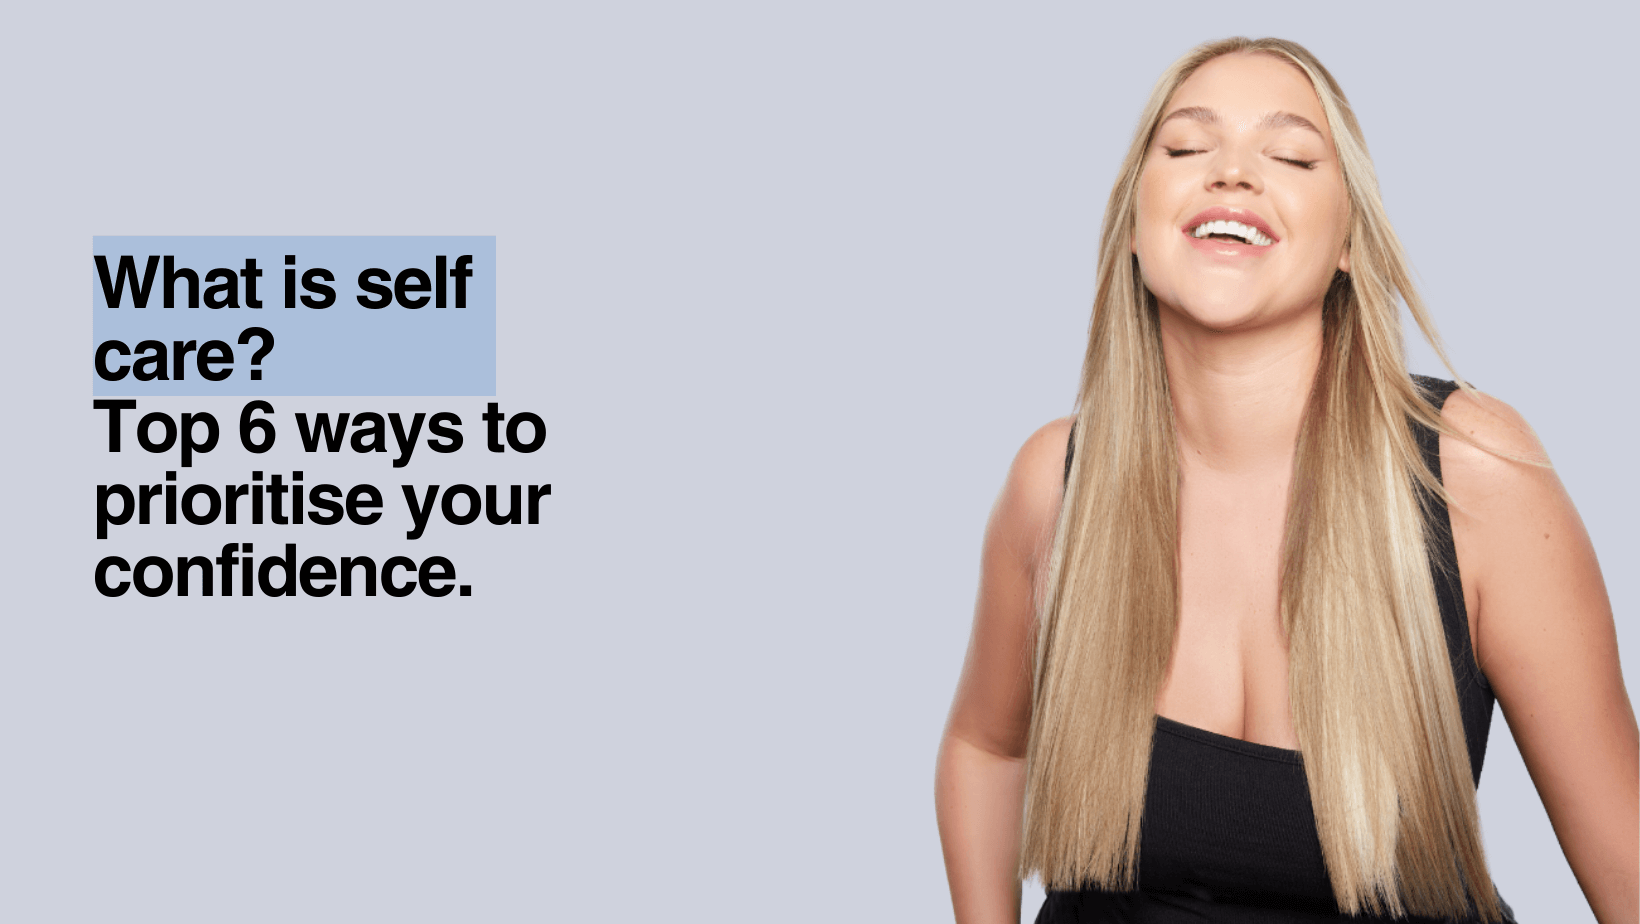 What Is Self Care? Top 6 Ways to Prioritise Your Confidence